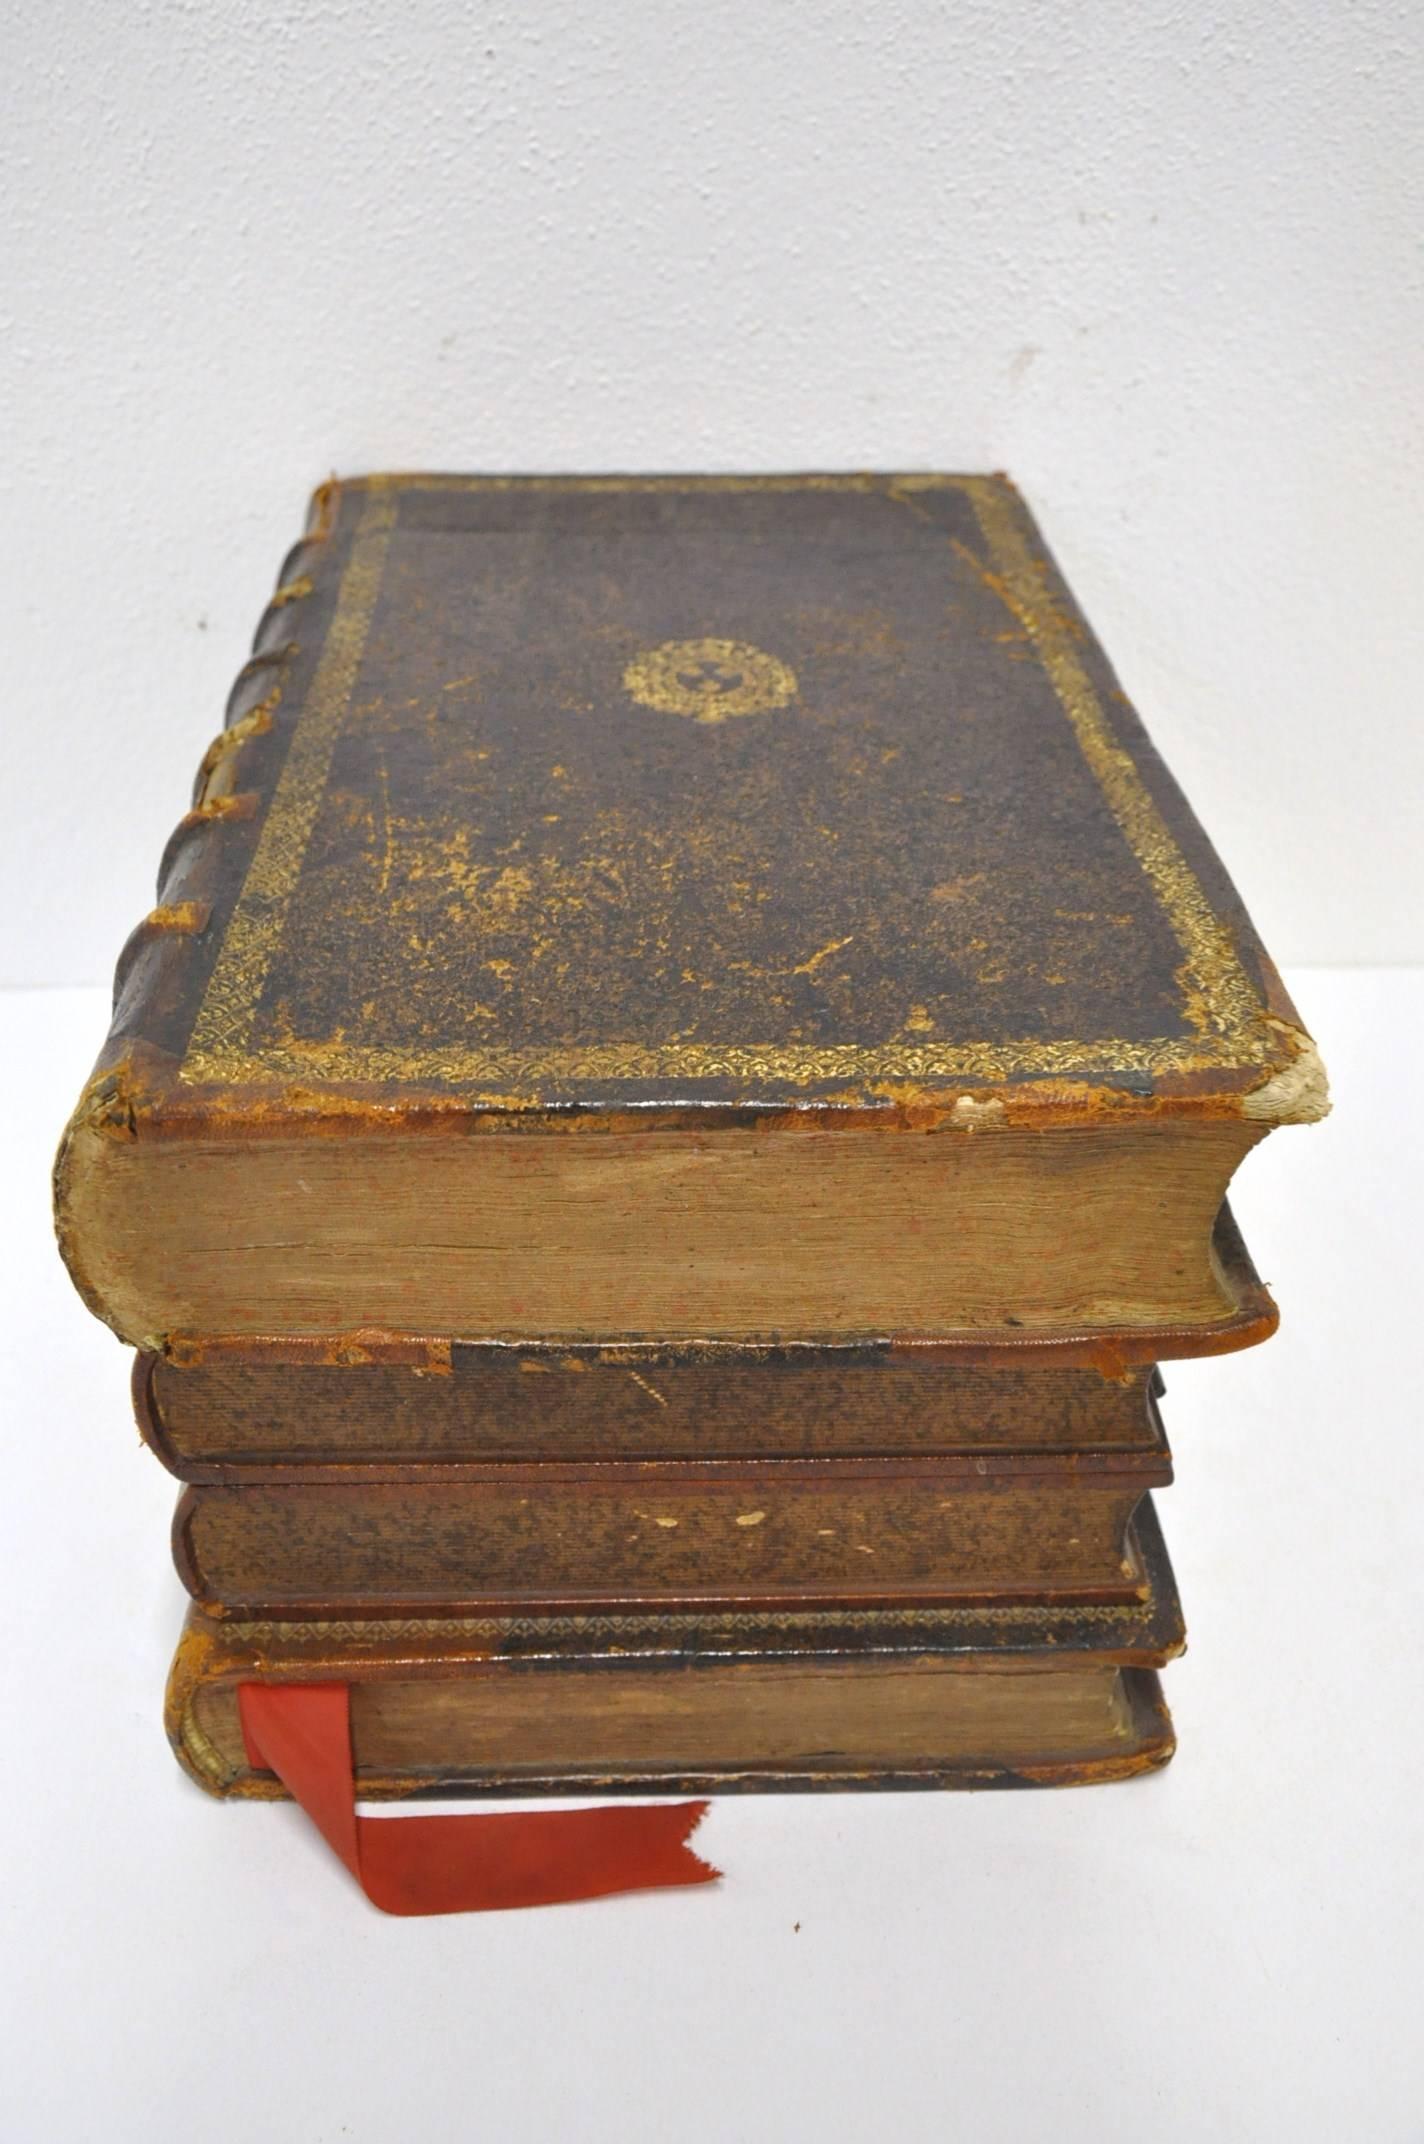 19th Century French Liquor Box Shaped like Four Leatherbound Books 3